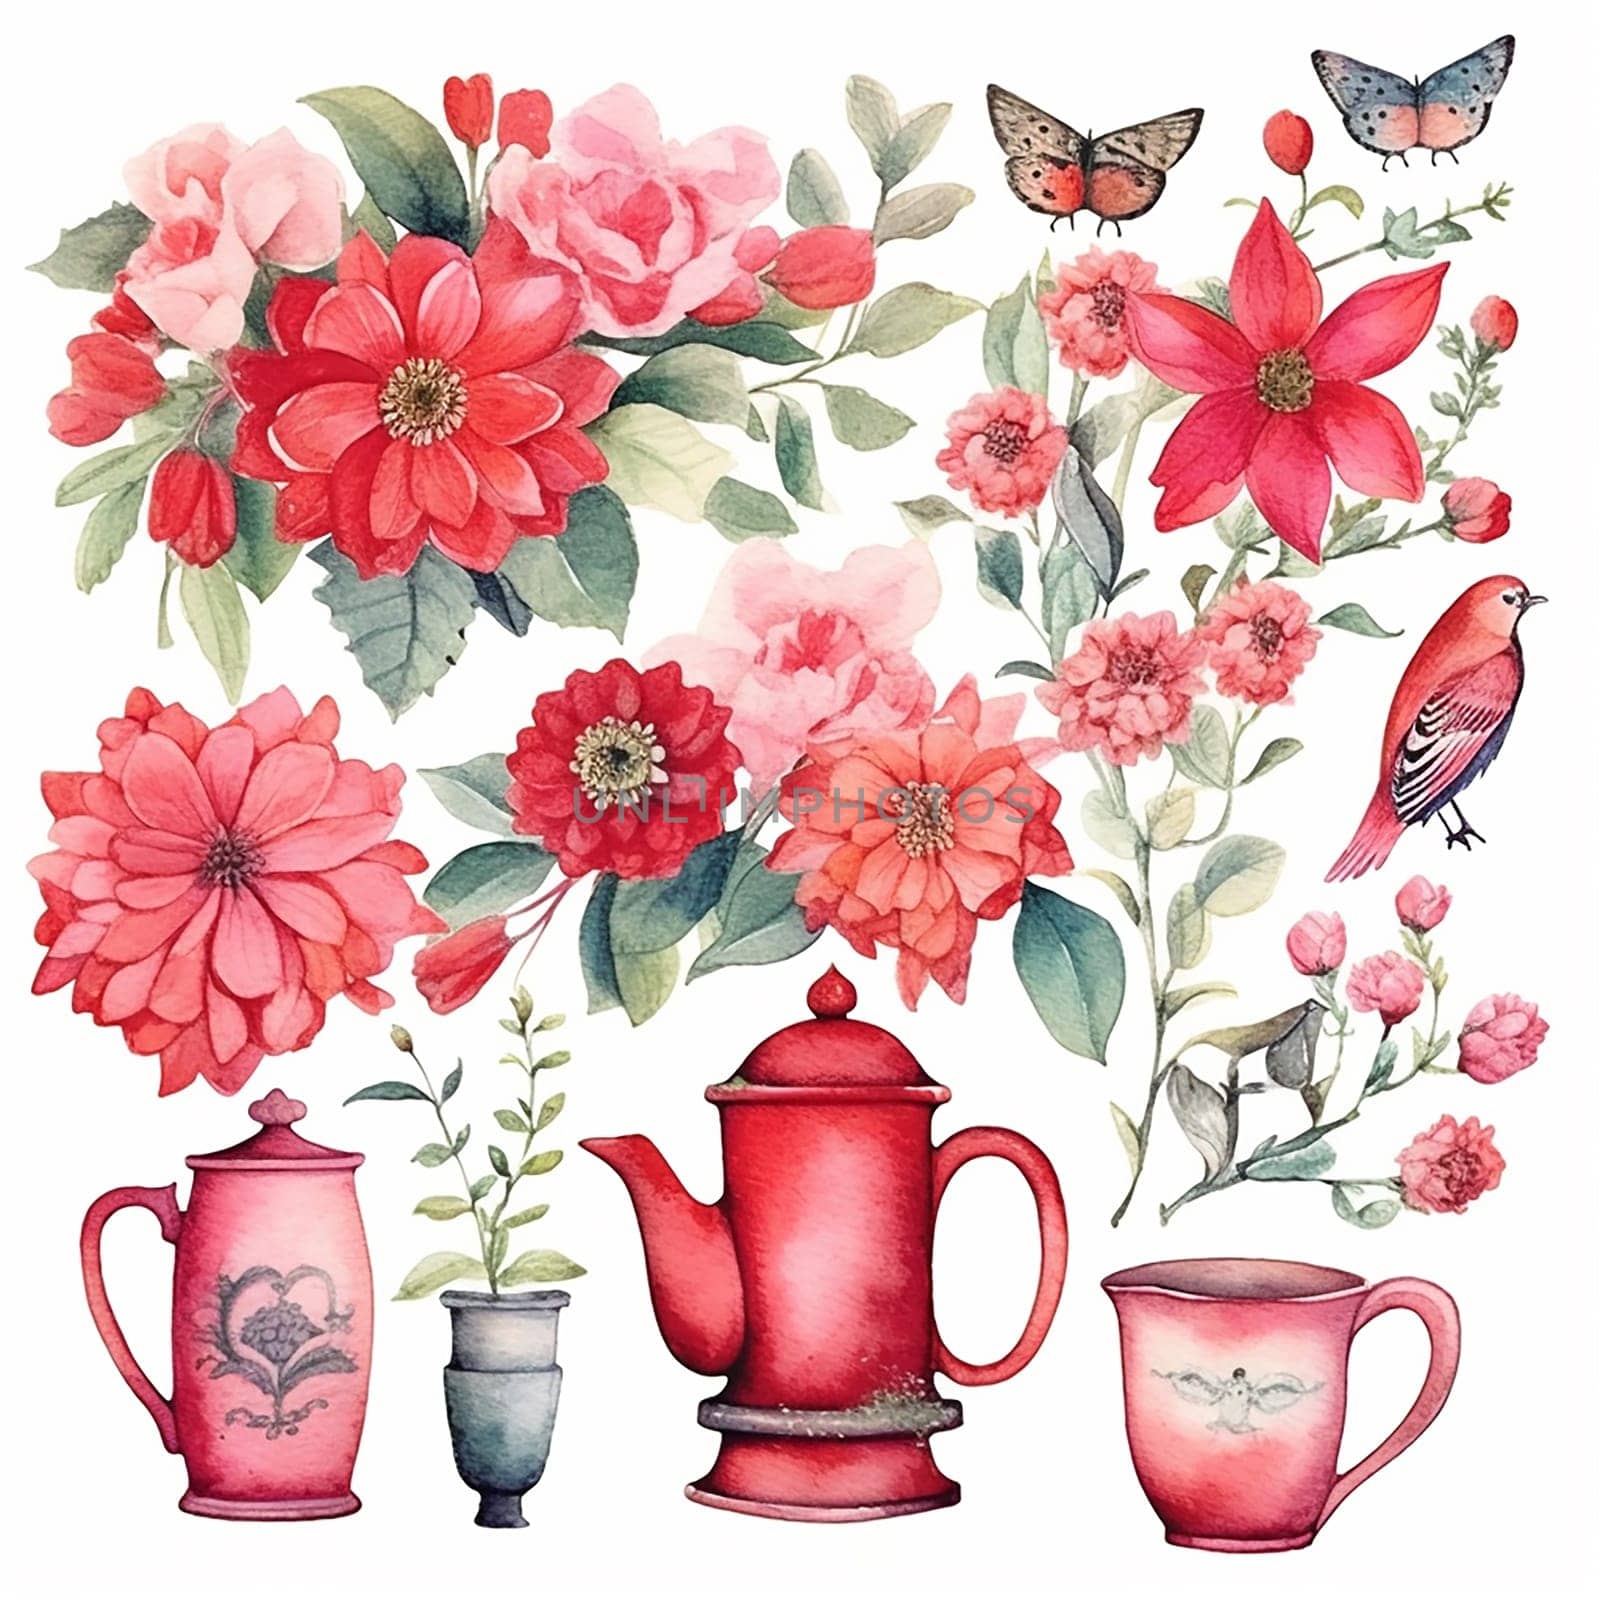 An illustration of red floral arrangement with butterflies, a bird, and a red teapot set.